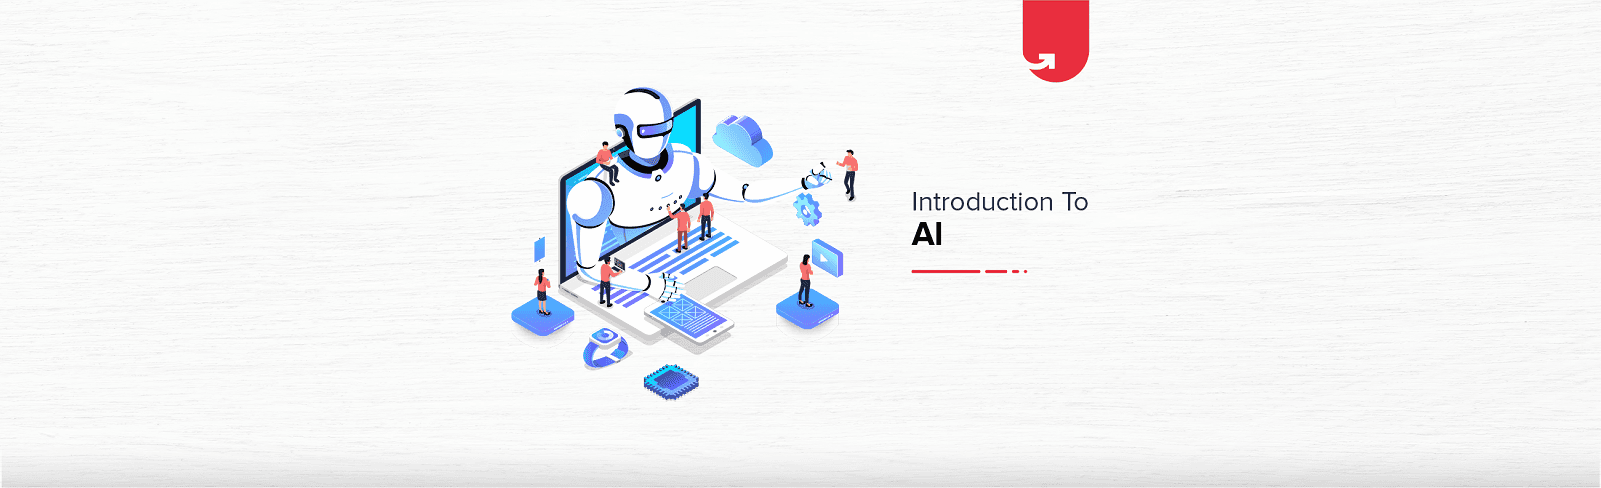 Introduction to AI: History, Components, Pros &amp; Cons, Examples &amp; Applications